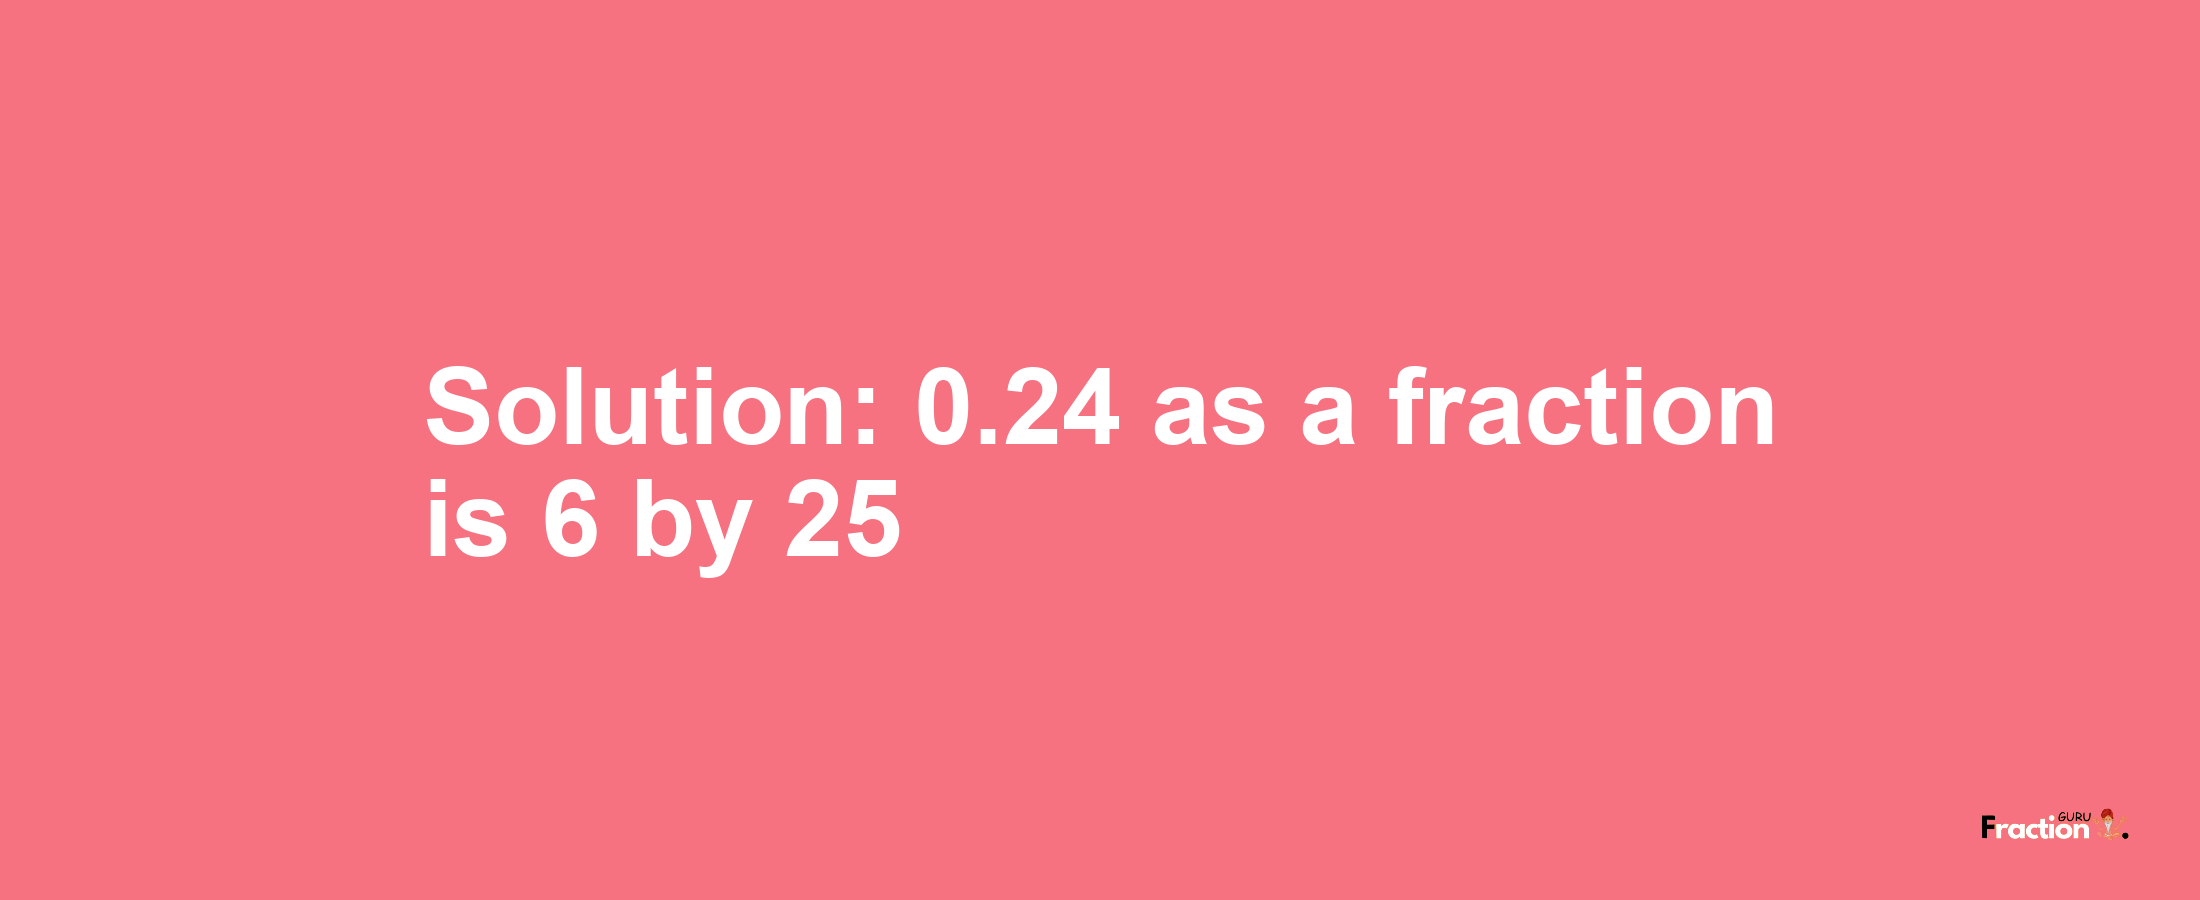 Solution:0.24 as a fraction is 6/25